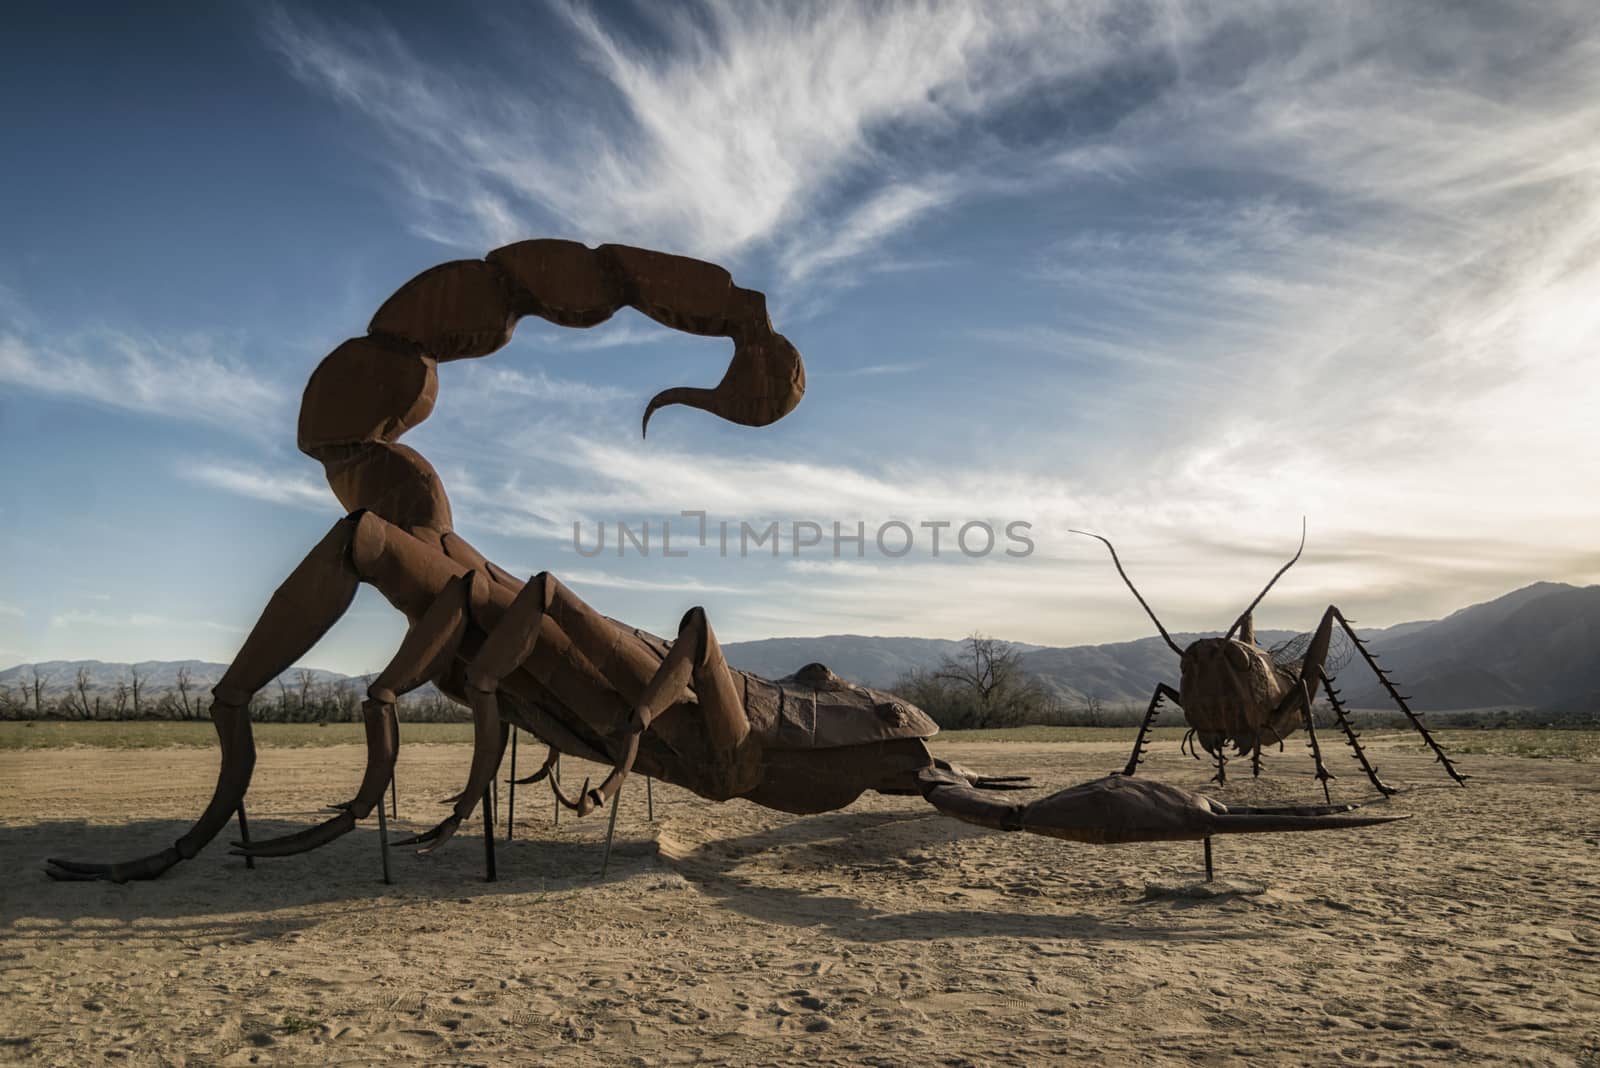 Artistic Metal Insects in the Desert, California